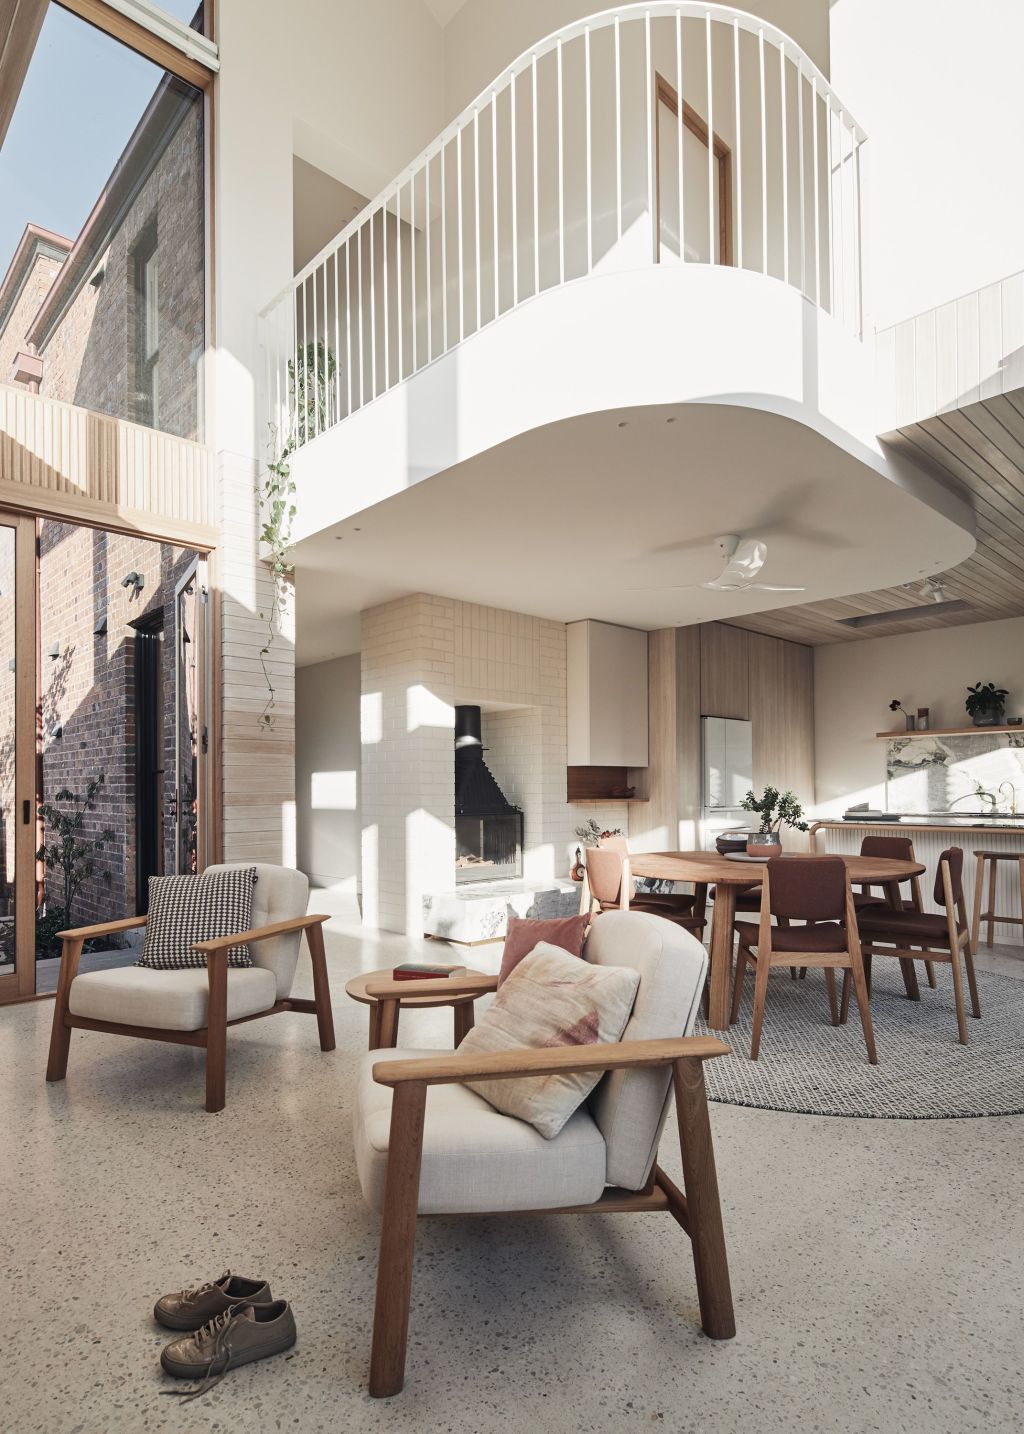 Keeping the kids in the picture is the elevated breakout balcony. Photo: Peter Bennetts.